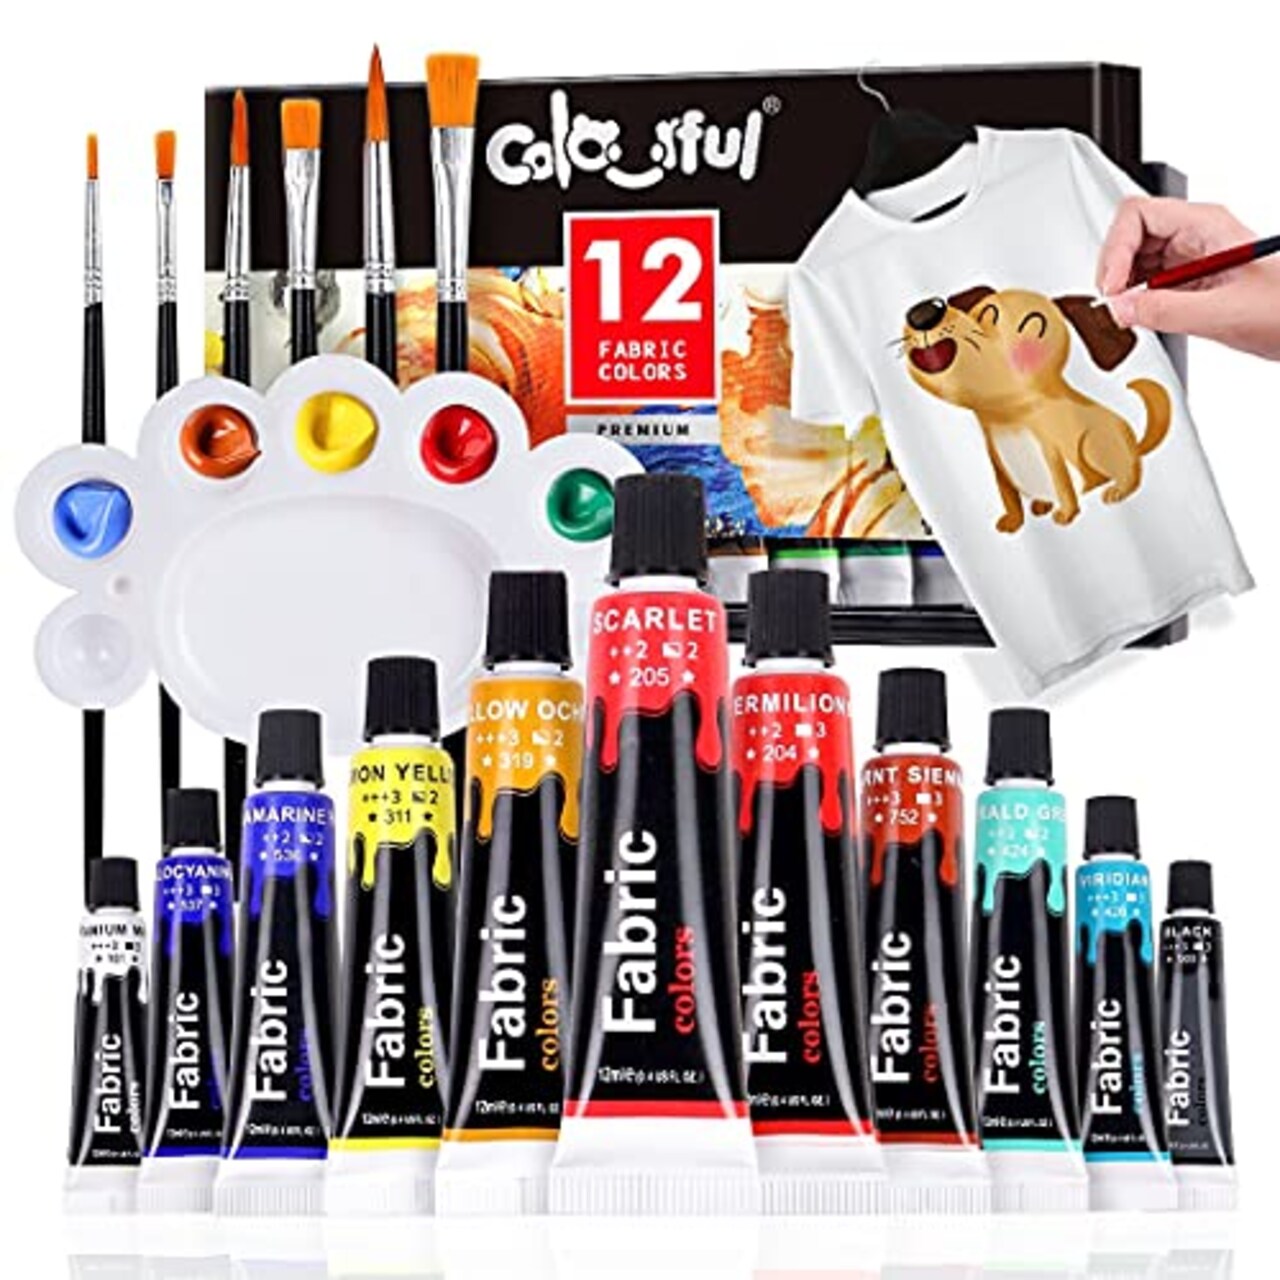 Colorful Fabric Paint Set for Clothes with 6 Brushes, 1 Palette, 12 Colors  - Permanent Textile Paint Puffy Paint Kit for Shoes, Canvas - Non-Toxic  Slick Painting Set for Adults, Beginner & Artists